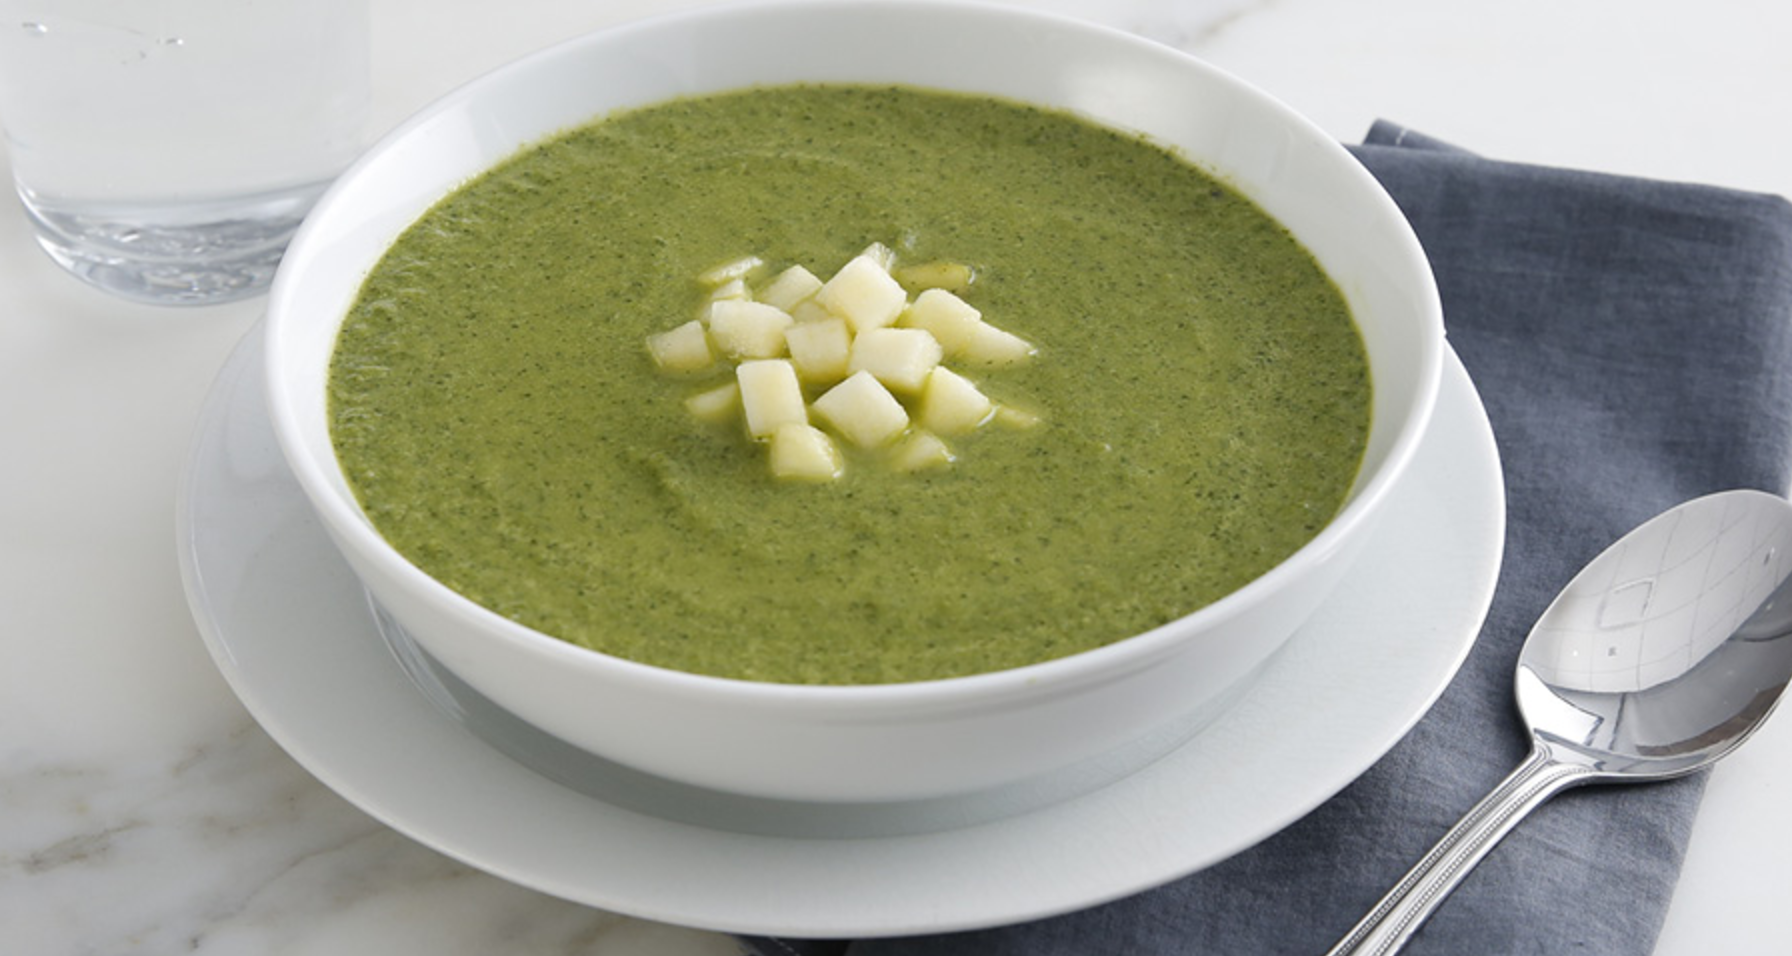 Chef Ming’s Creamless Watercress Soup With Honey-Apple Salsa